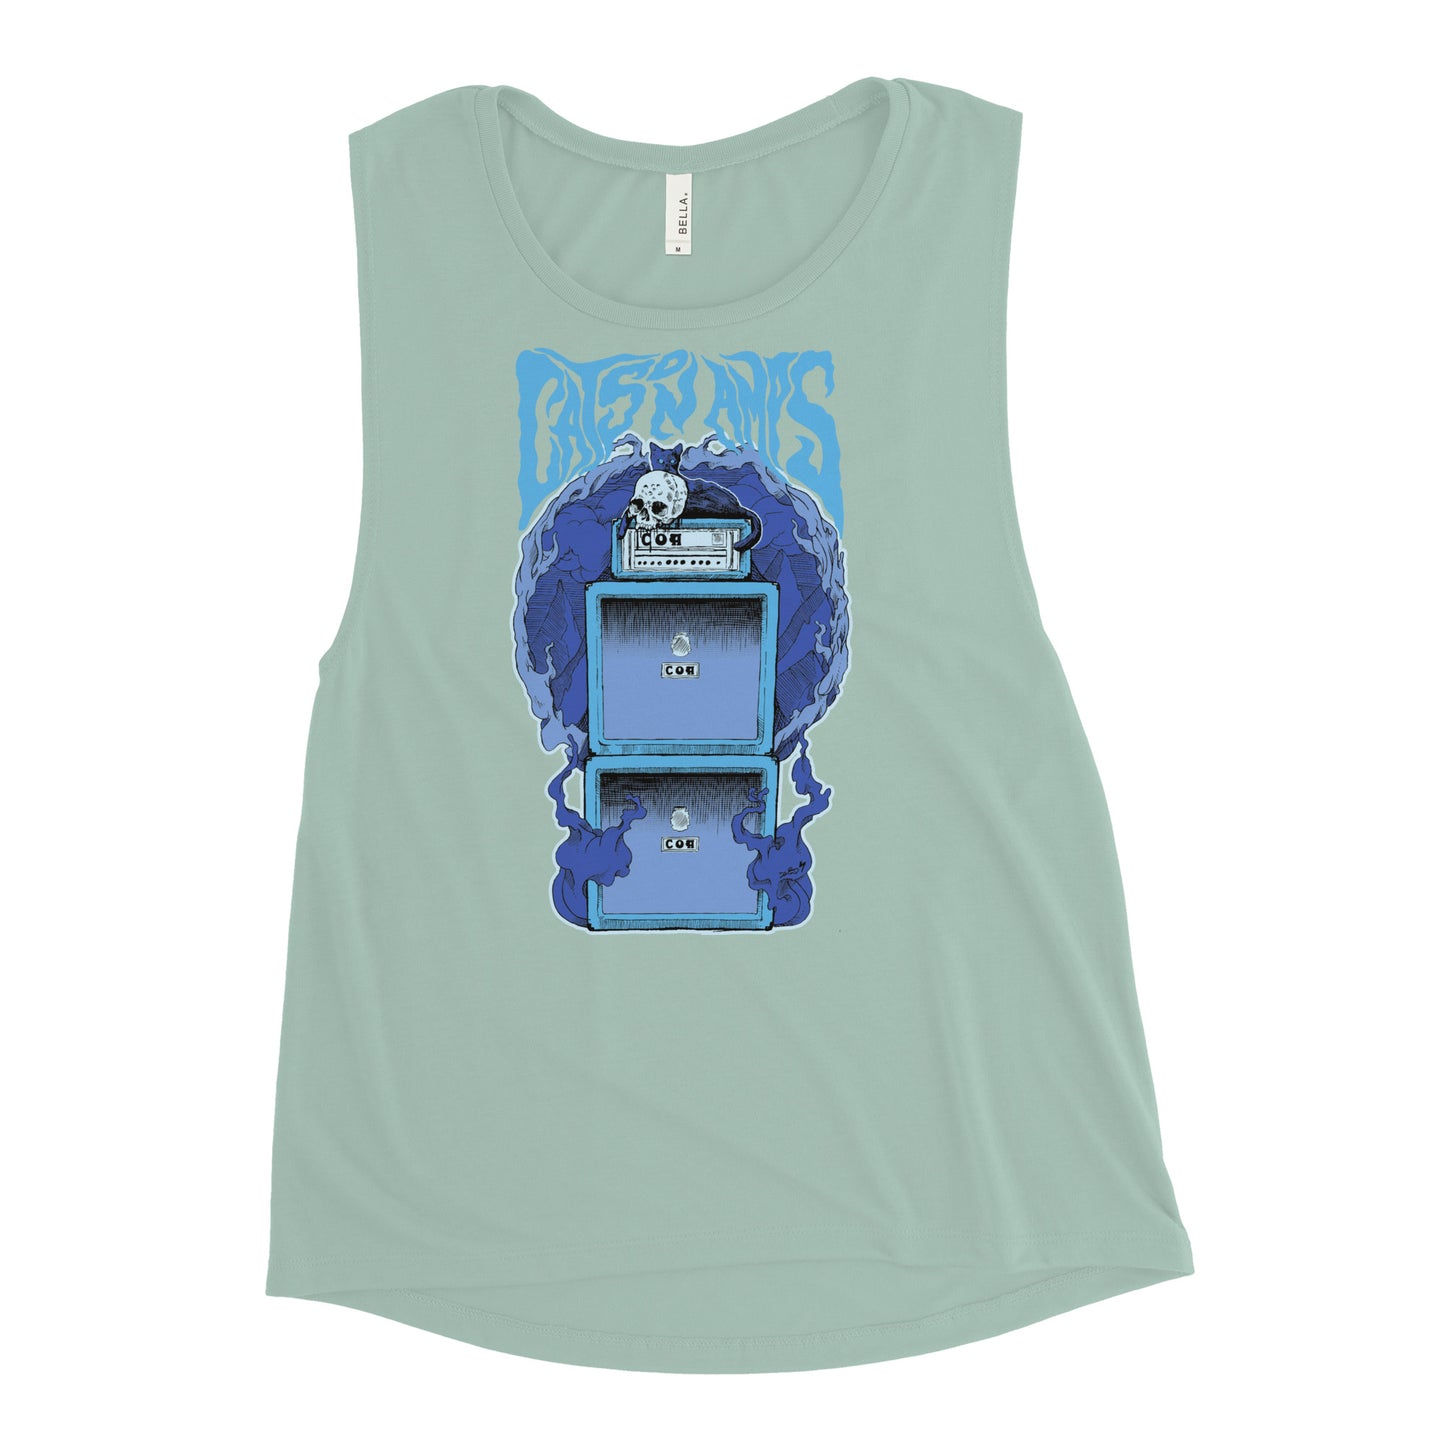 CATS ON AMPS - Midnight - Ladies’ Muscle Tank